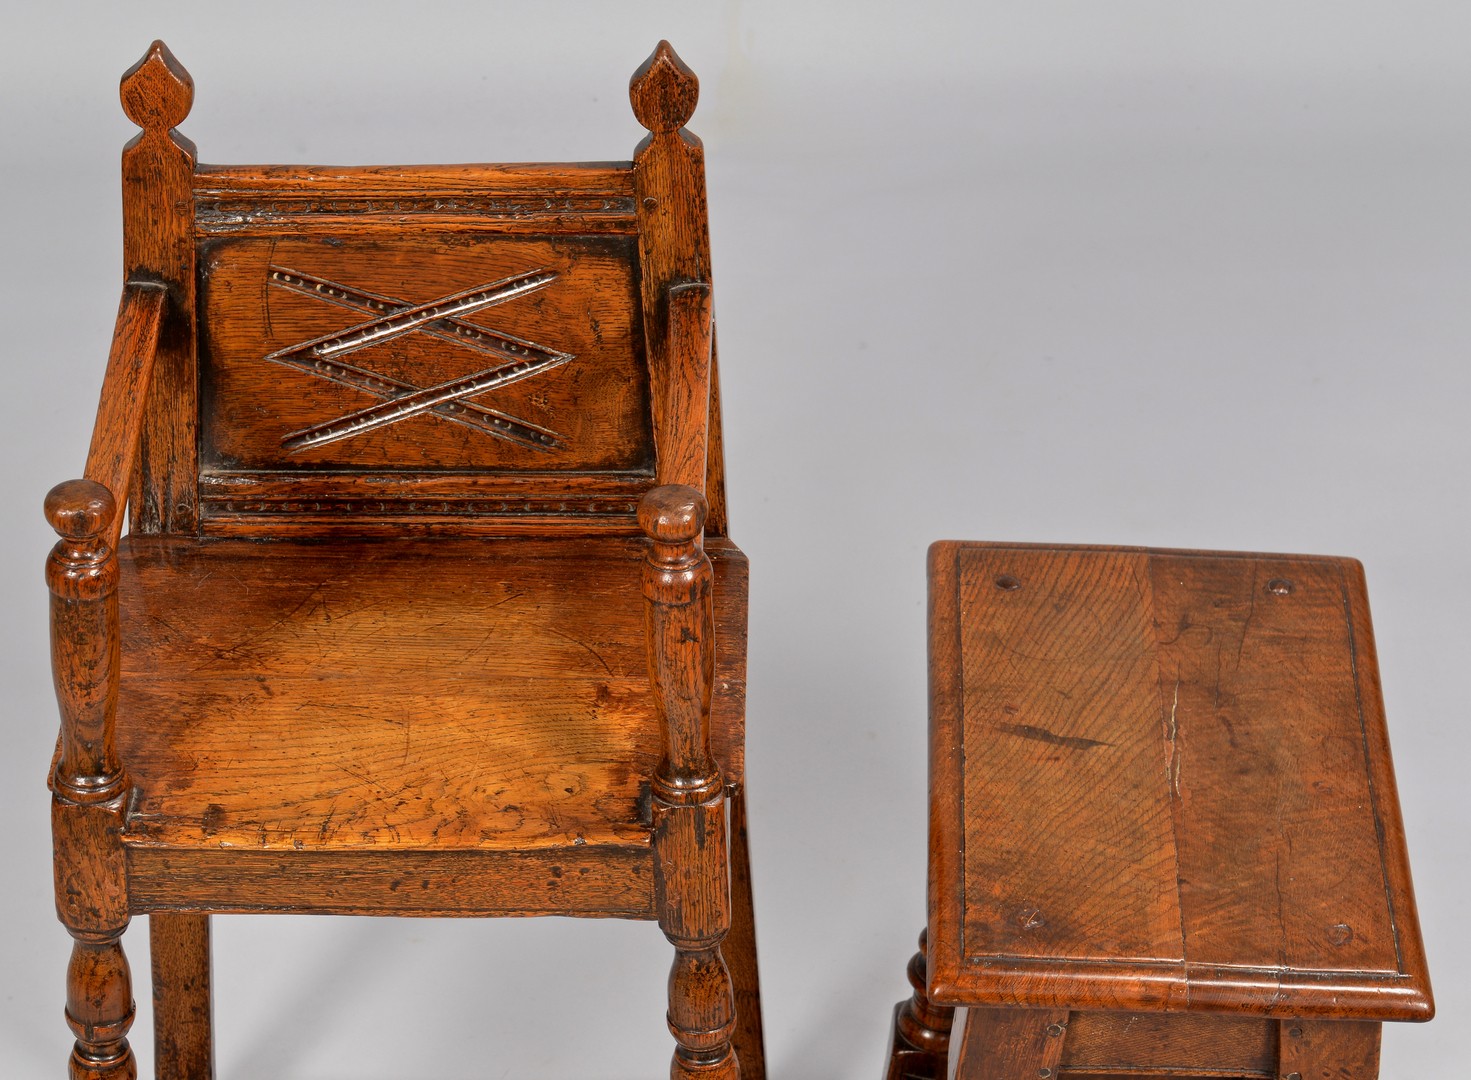 Lot 317: English Jacobean High Chair and small Table/stool